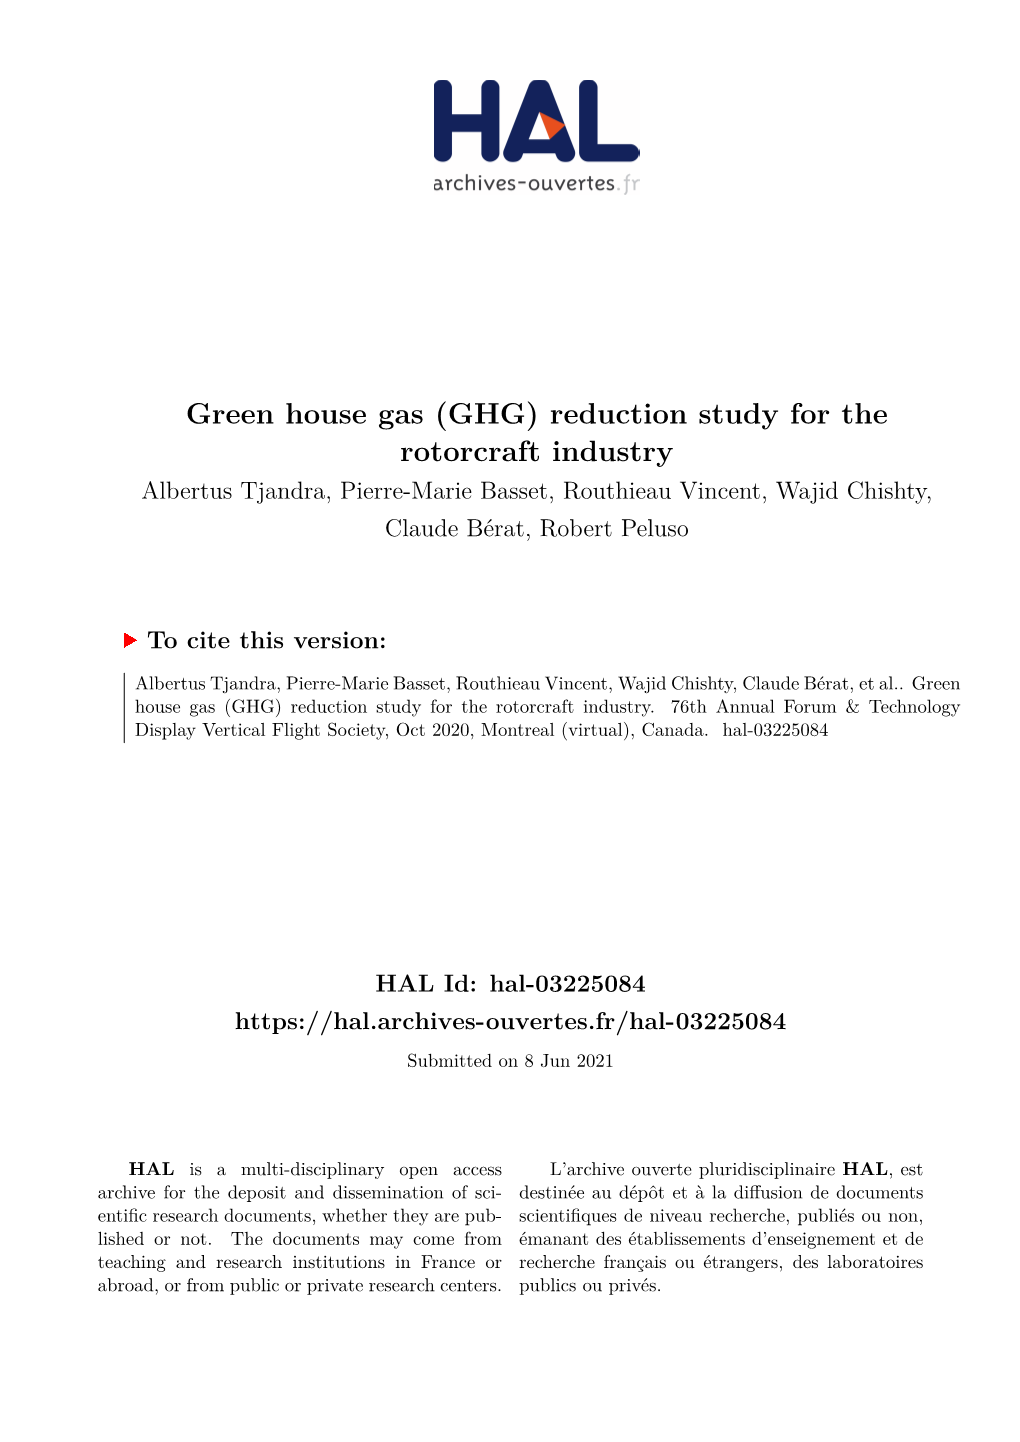 Green House Gas (GHG) Reduction Study for the Rotorcraft Industry Albertus Tjandra, Pierre-Marie Basset, Routhieau Vincent, Wajid Chishty, Claude Bérat, Robert Peluso